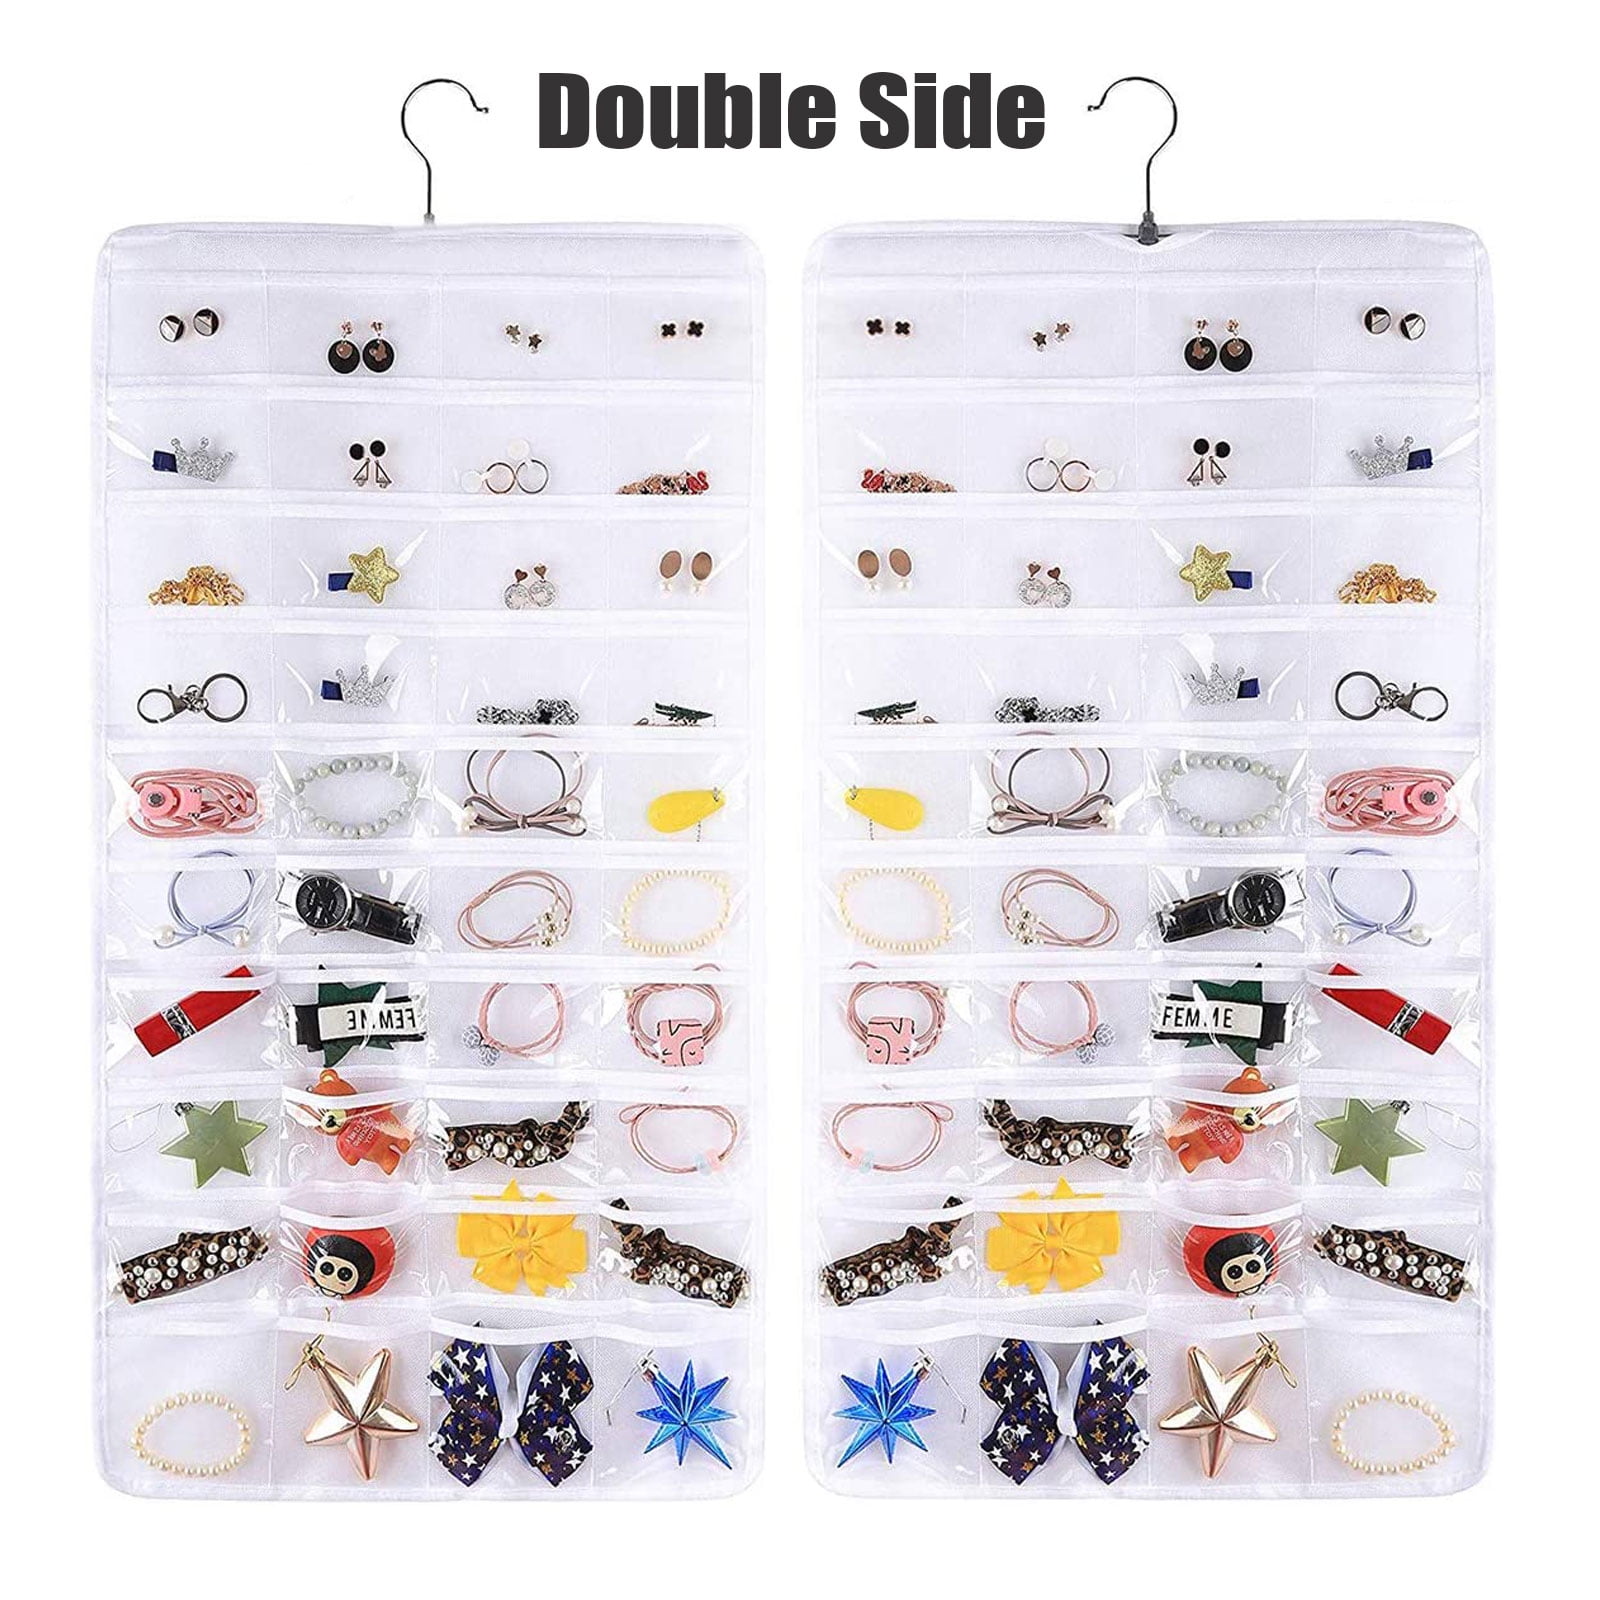 80 Pocket Double Side Hanging Jewelry Organizer Accessories Holder 